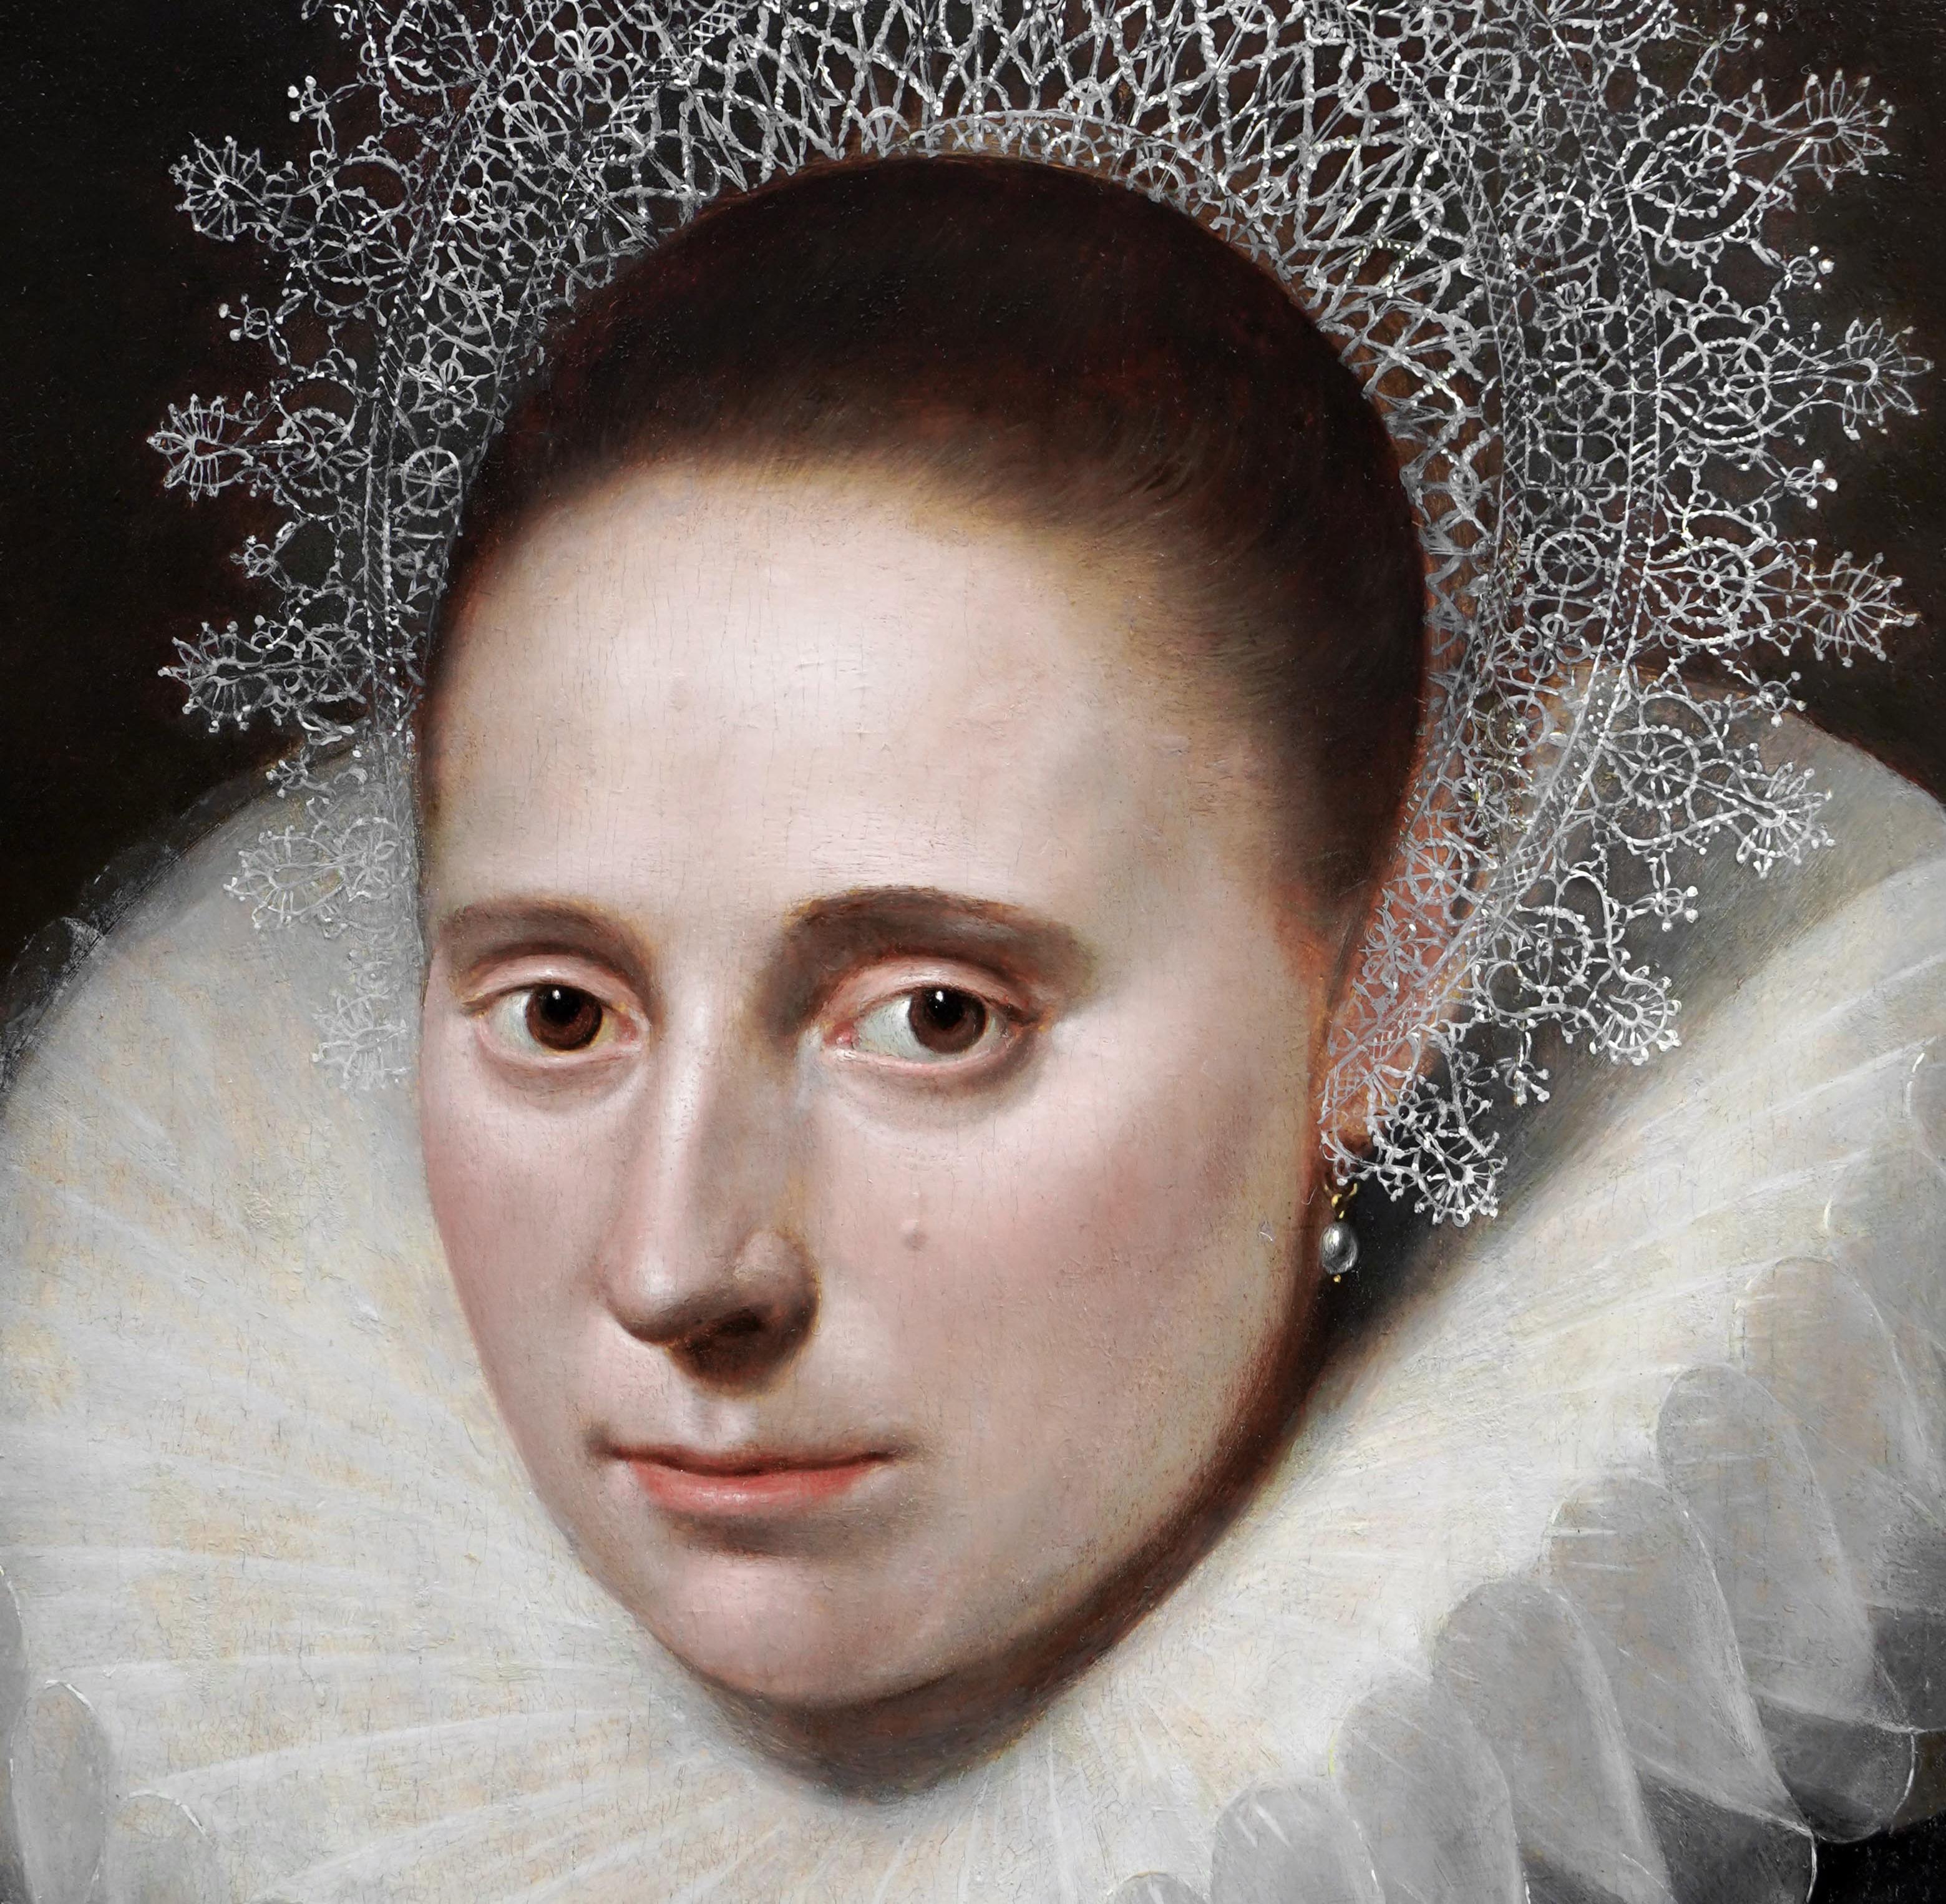 Portrait of a Lady in an Elaborate Ruff & Lace Coif c.1610-20, Dutch Old Master For Sale 4